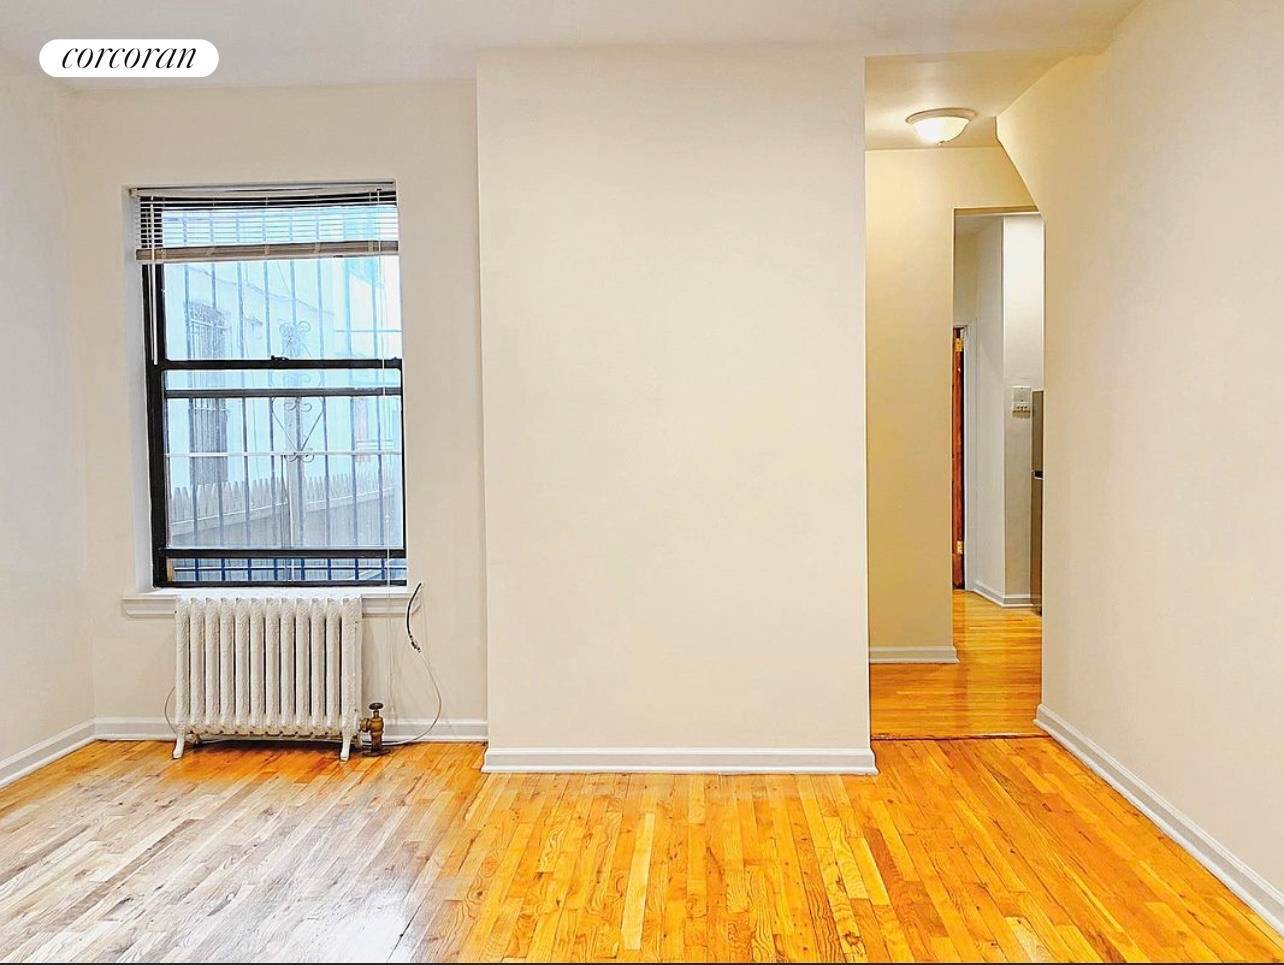 Super spacious large one bedroom with an additional room for an office work from home or use as a second bedroom guest room with full size bed.